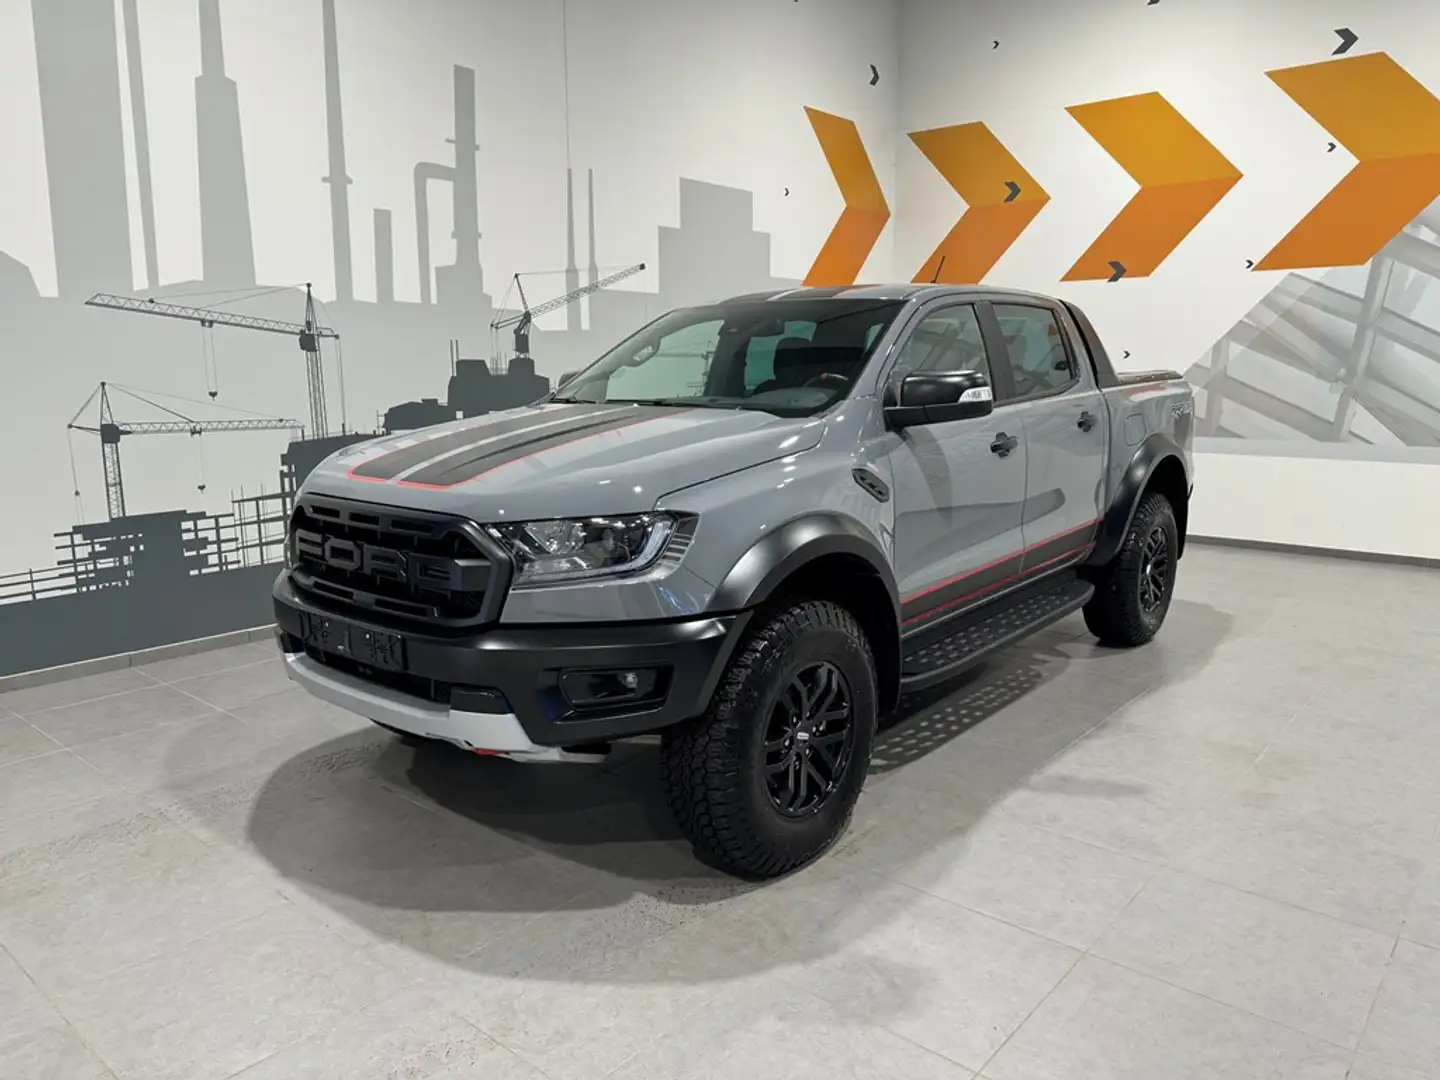 Ford Ranger Raptor Special Edition - € 42.990 excl. BTW!!! siva - 2